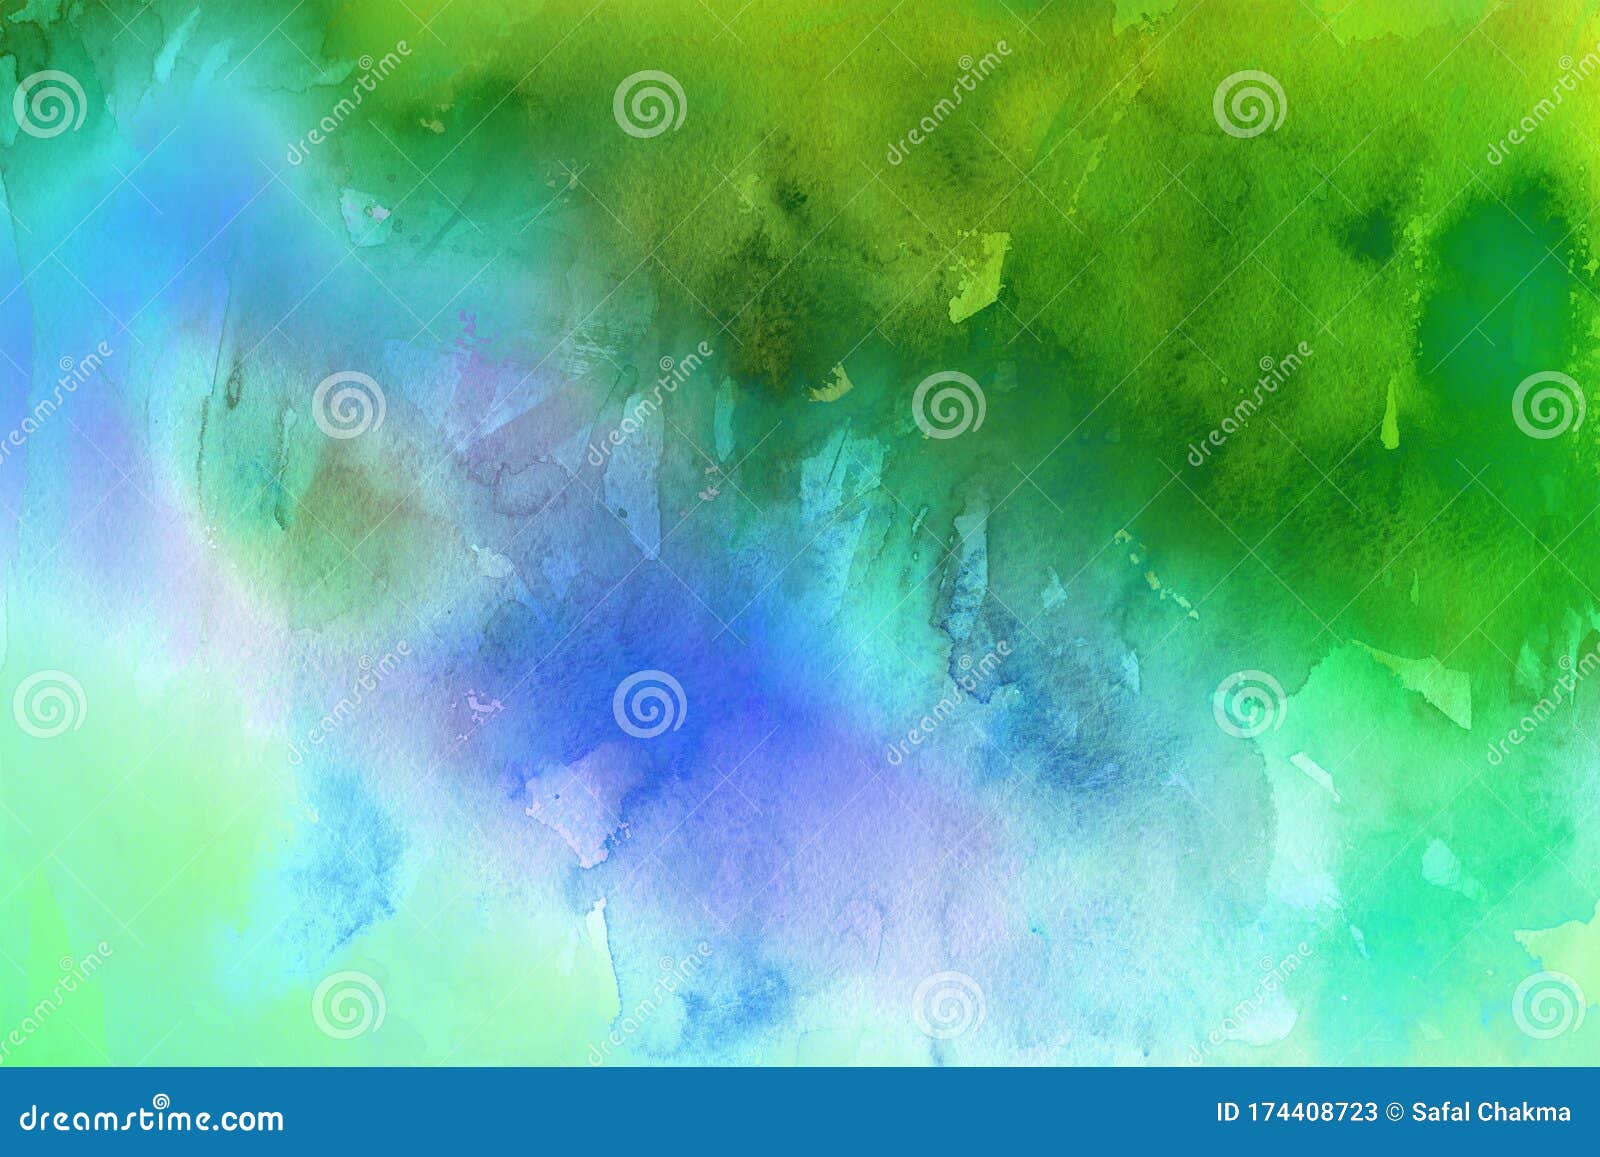 High Resolution Colorful Textured Background. Stock Image - Image of ...